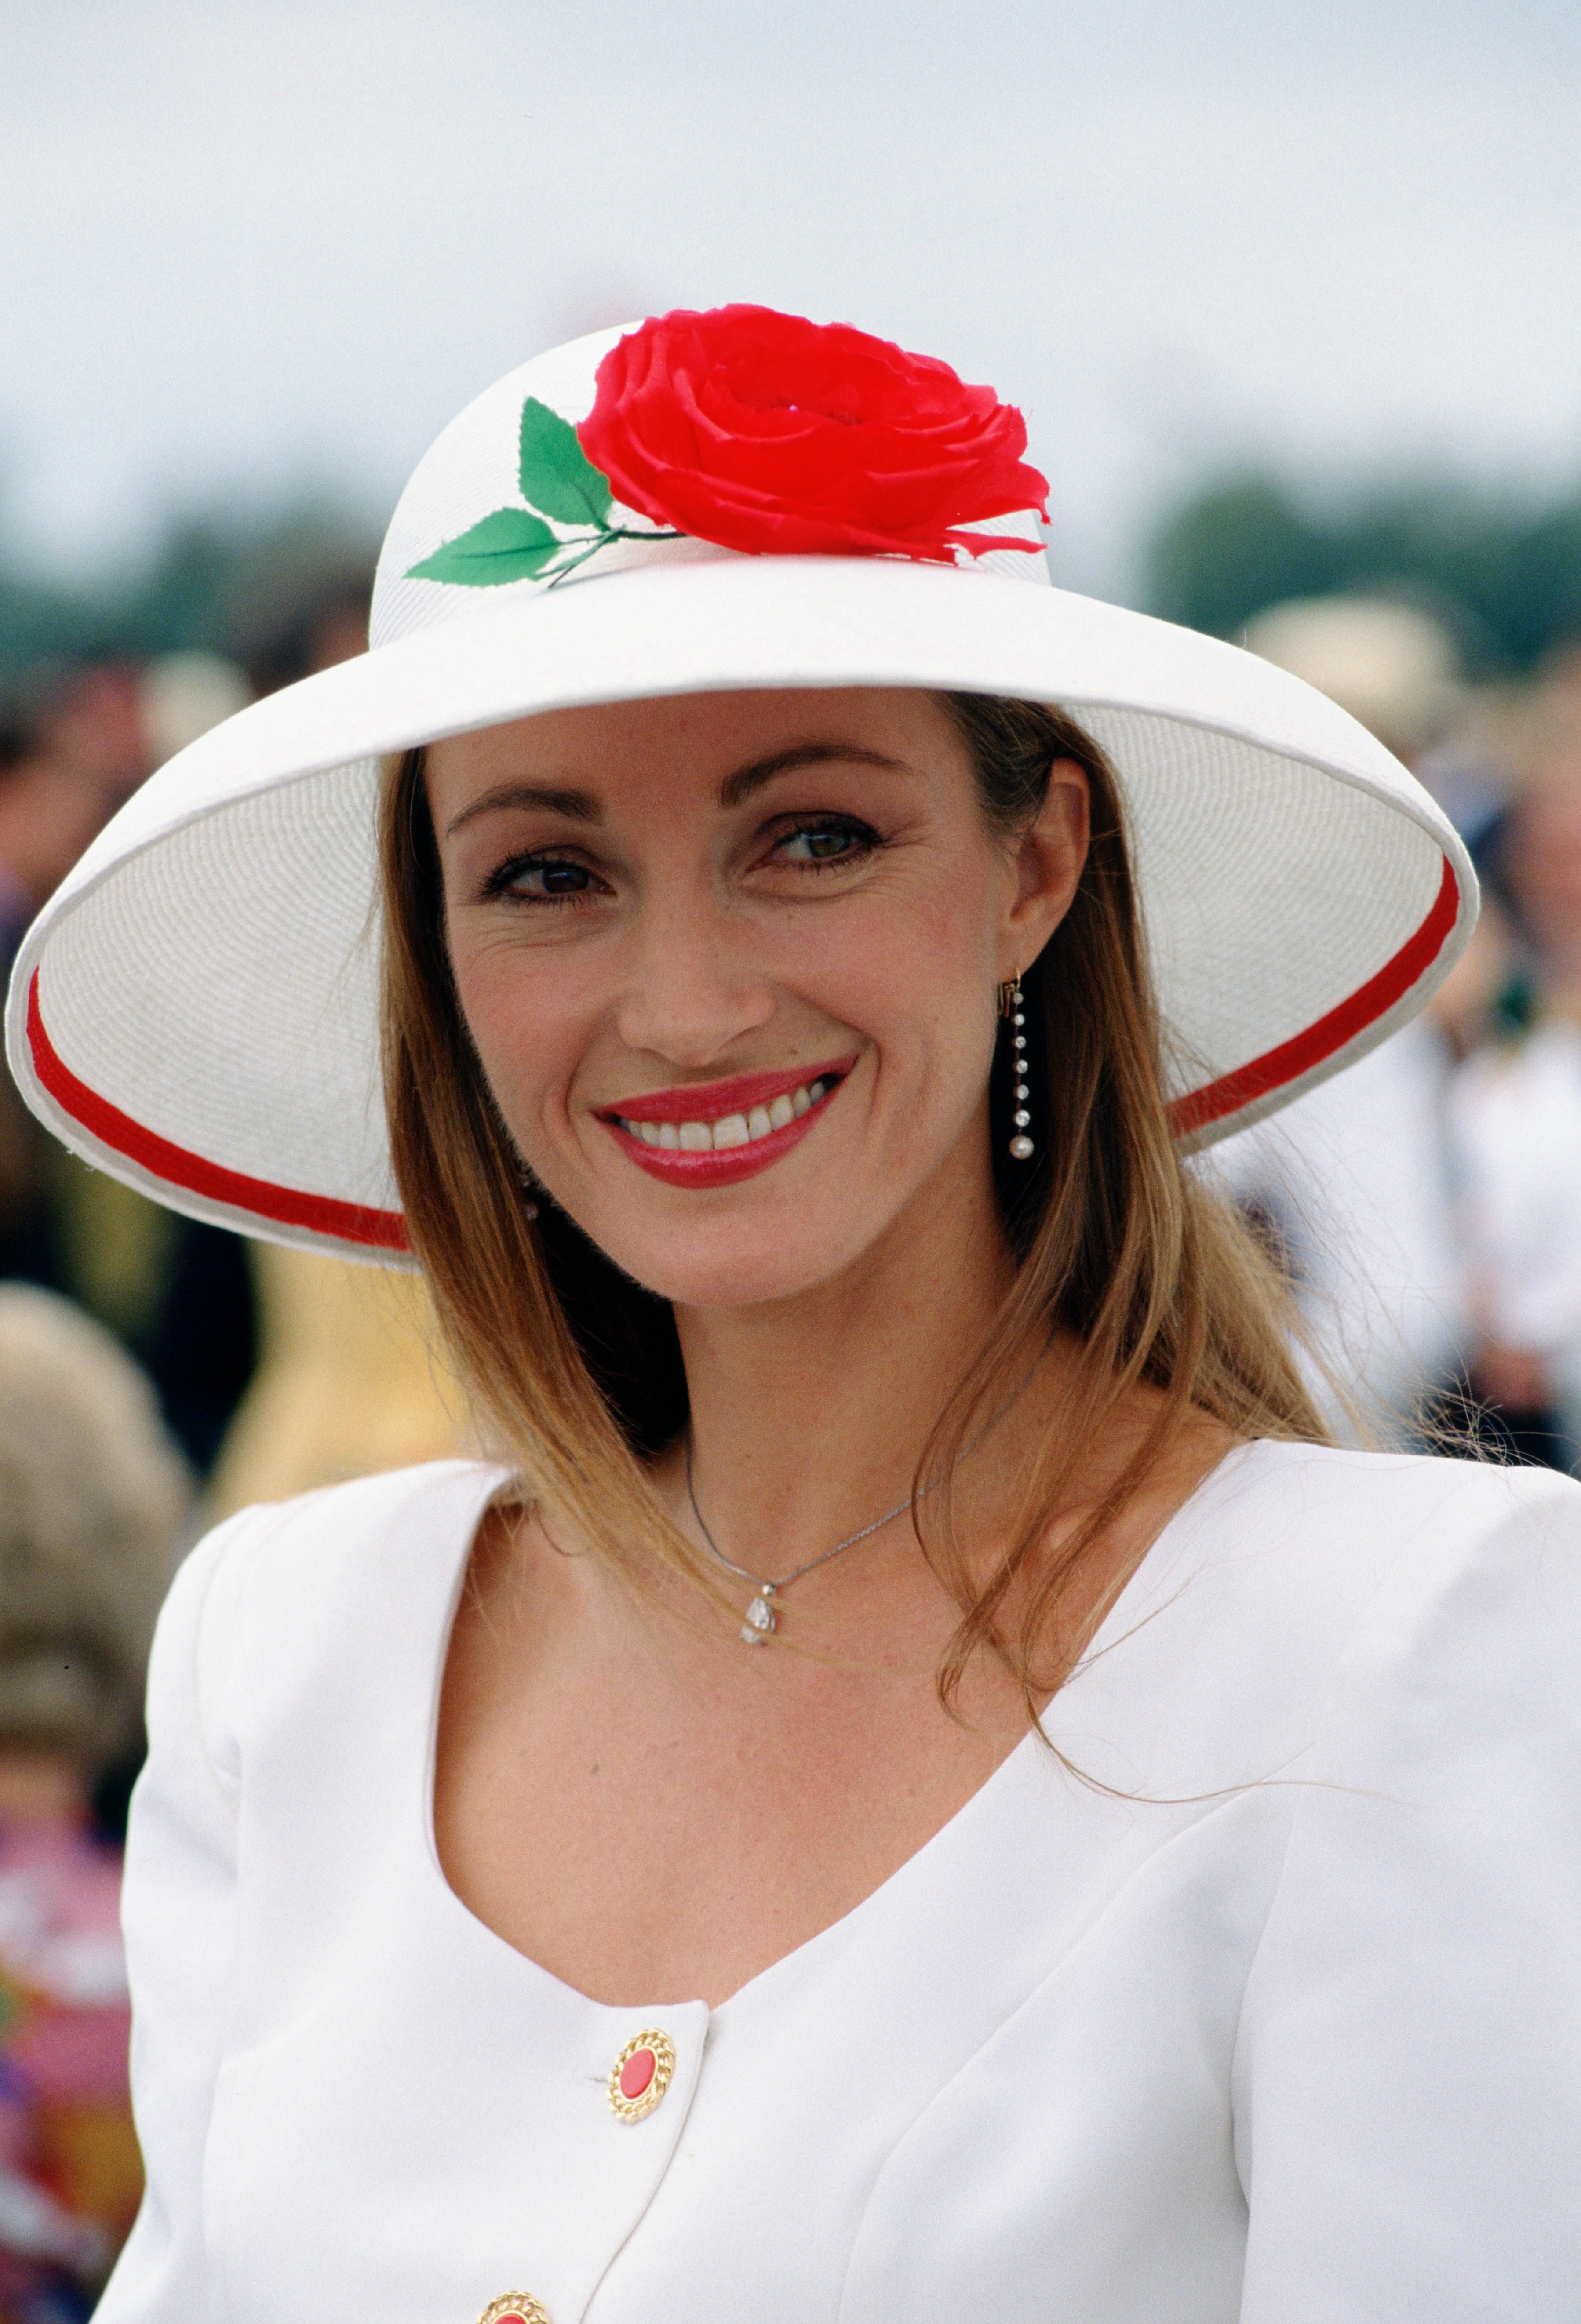 Jane Seymour at Cartier Polo Day in Windsor, Berkshire, United Kingdom, on July 29, 1990. | Source: Tim Graham/Getty Images